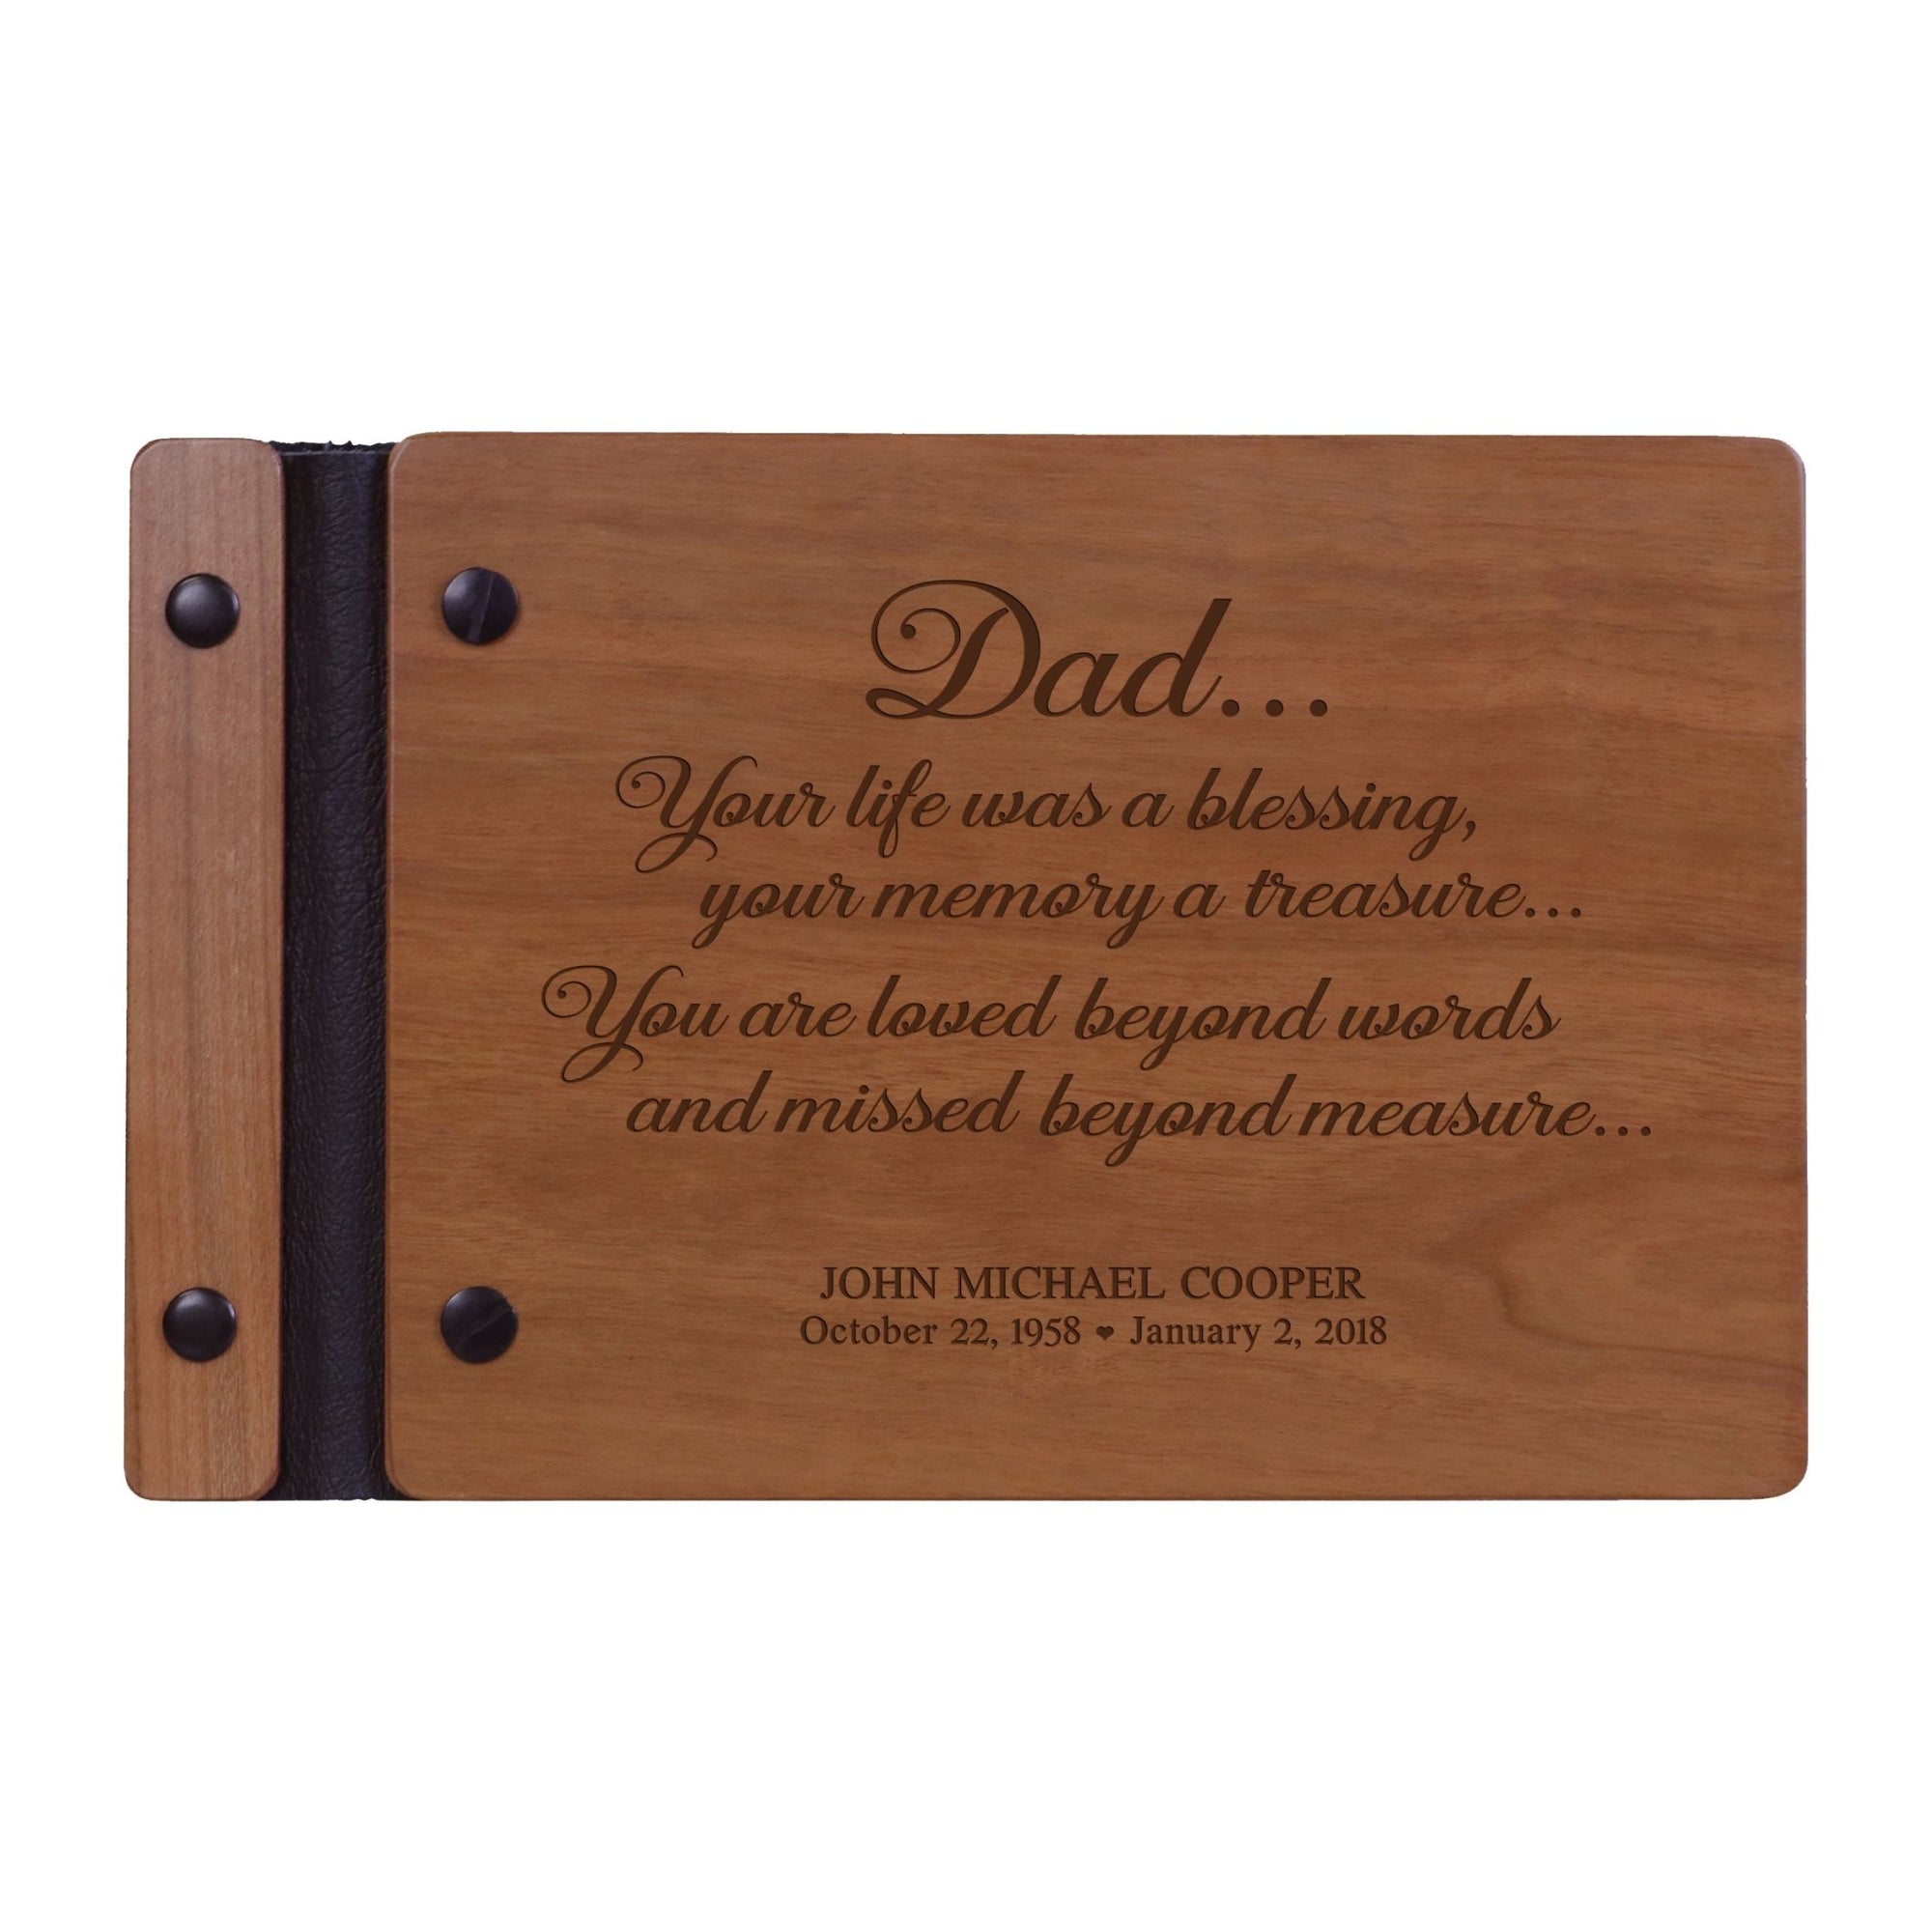 Personalized Memorial Guest Book - Dad - LifeSong Milestones